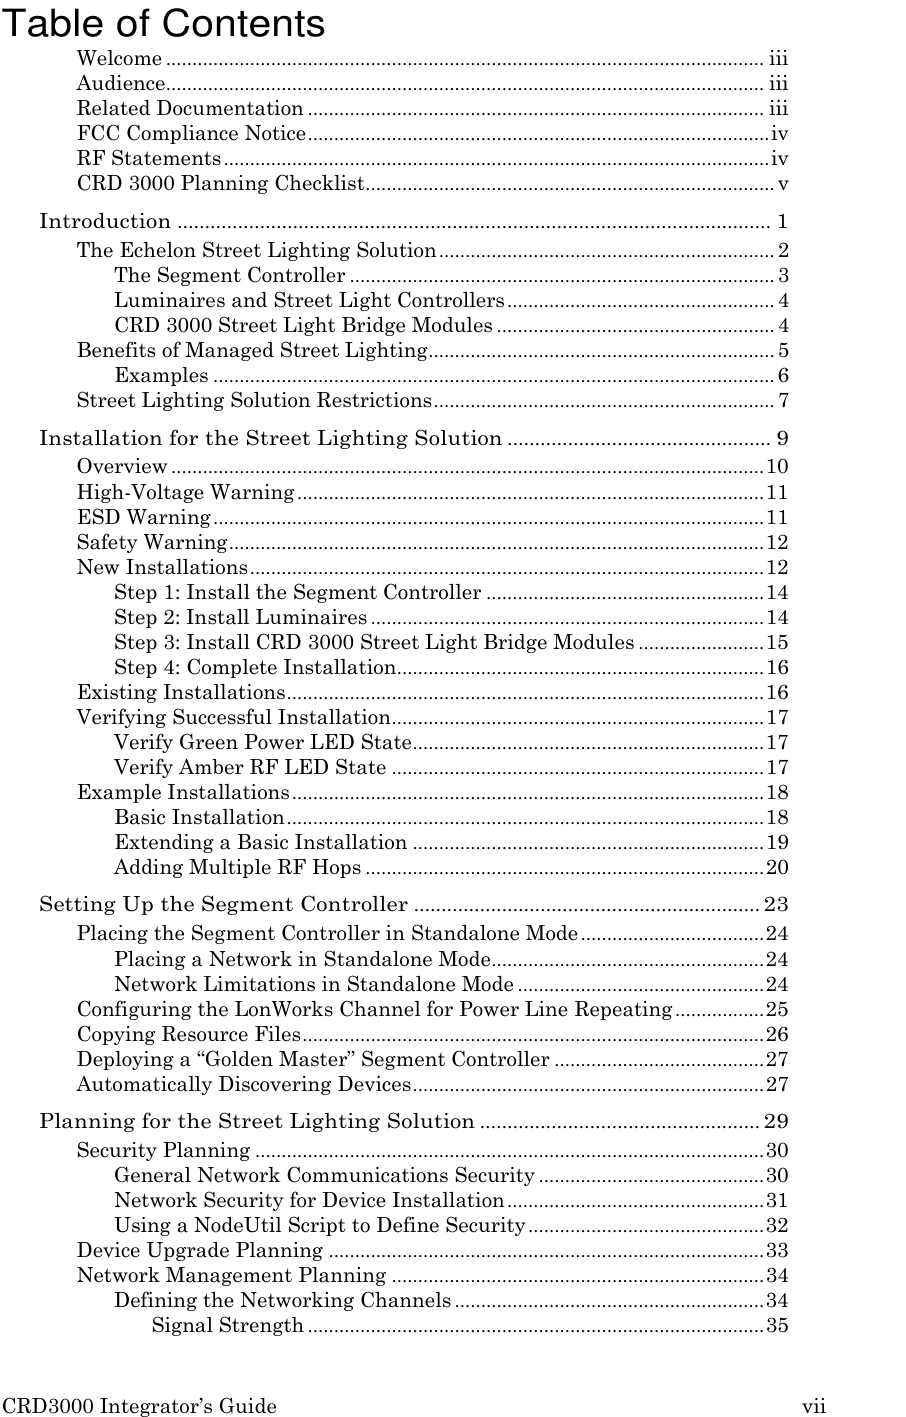 CRD3000 Integrator’s Guide vii    Table of Contents Welcome .................................................................................................................. iii Audience .................................................................................................................. iii Related Documentation ....................................................................................... iii FCC Compliance Notice ........................................................................................ iv RF Statements ........................................................................................................ iv CRD 3000 Planning Checklist .............................................................................. v Introduction ............................................................................................................ 1 The Echelon Street Lighting Solution ................................................................ 2 The Segment Controller ................................................................................. 3 Luminaires and Street Light Controllers ................................................... 4 CRD 3000 Street Light Bridge Modules ..................................................... 4 Benefits of Managed Street Lighting .................................................................. 5 Examples ........................................................................................................... 6 Street Lighting Solution Restrictions ................................................................. 7 Installation for the Street Lighting Solution ................................................ 9 Overview ................................................................................................................. 10 High-Voltage Warning ......................................................................................... 11 ESD Warning ......................................................................................................... 11 Safety Warning ...................................................................................................... 12 New Installations .................................................................................................. 12 Step 1: Install the Segment Controller ..................................................... 14 Step 2: Install Luminaires ........................................................................... 14 Step 3: Install CRD 3000 Street Light Bridge Modules ........................ 15 Step 4: Complete Installation...................................................................... 16 Existing Installations ........................................................................................... 16 Verifying Successful Installation ....................................................................... 17 Verify Green Power LED State ................................................................... 17 Verify Amber RF LED State ....................................................................... 17 Example Installations .......................................................................................... 18 Basic Installation ........................................................................................... 18 Extending a Basic Installation ................................................................... 19 Adding Multiple RF Hops ............................................................................ 20 Setting Up the Segment Controller ............................................................... 23 Placing the Segment Controller in Standalone Mode ................................... 24 Placing a Network in Standalone Mode.................................................... 24 Network Limitations in Standalone Mode ............................................... 24 Configuring the LonWorks Channel for Power Line Repeating ................. 25 Copying Resource Files ........................................................................................ 26 Deploying a “Golden Master” Segment Controller ........................................ 27 Automatically Discovering Devices ................................................................... 27 Planning for the Street Lighting Solution ................................................... 29 Security Planning ................................................................................................. 30 General Network Communications Security ........................................... 30 Network Security for Device Installation ................................................. 31 Using a NodeUtil Script to Define Security ............................................. 32 Device Upgrade Planning ................................................................................... 33 Network Management Planning ....................................................................... 34 Defining the Networking Channels ........................................................... 34 Signal Strength ....................................................................................... 35 